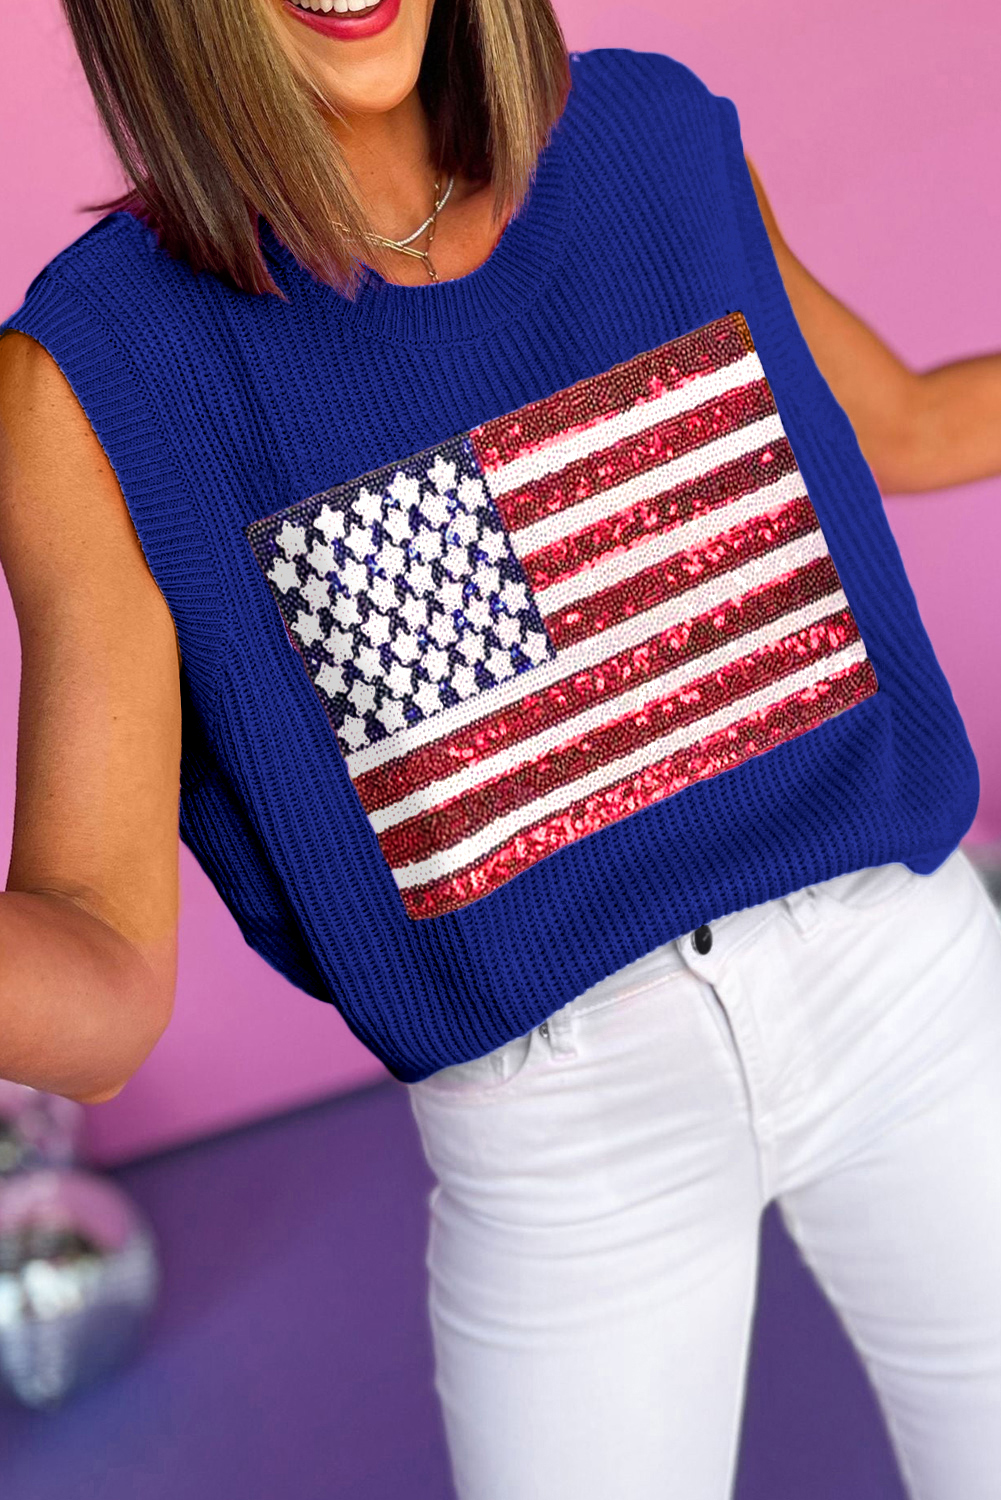 Shewin Wholesale Southern Bluing Sequin American FLAG Knit Top